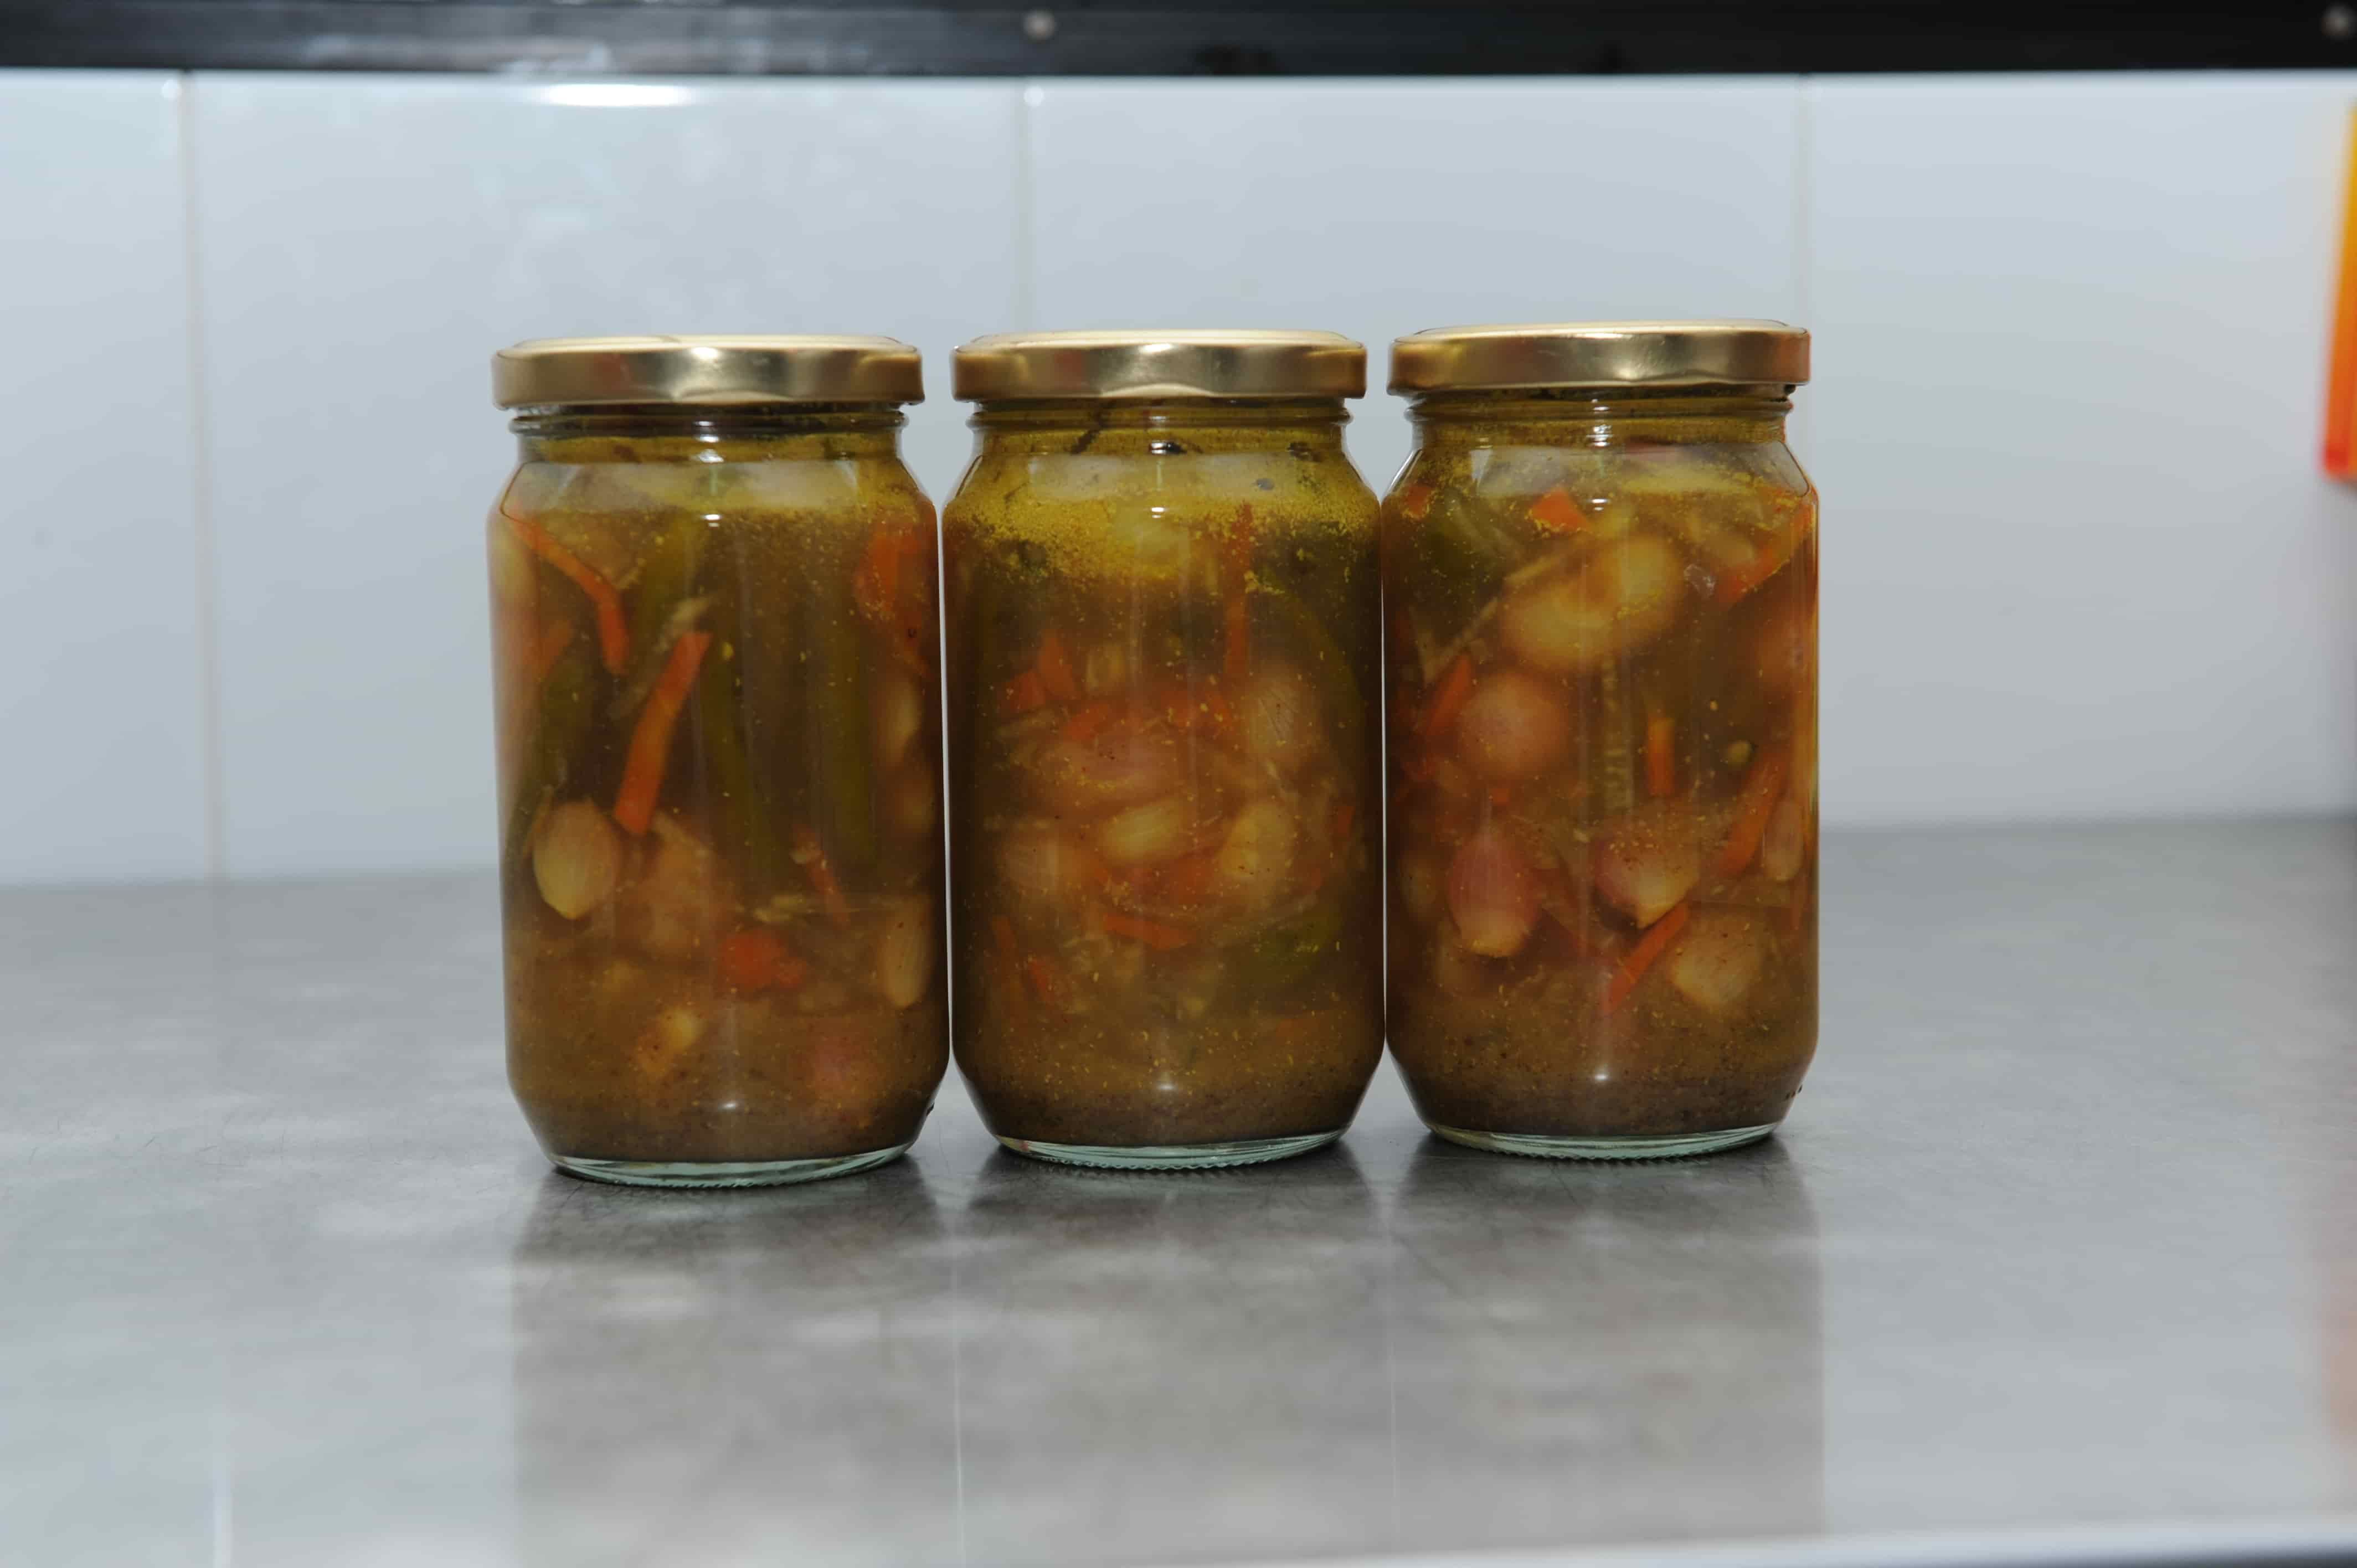 Nutritious and delicious salads, pickles and desserts in jars from Sri Lanka